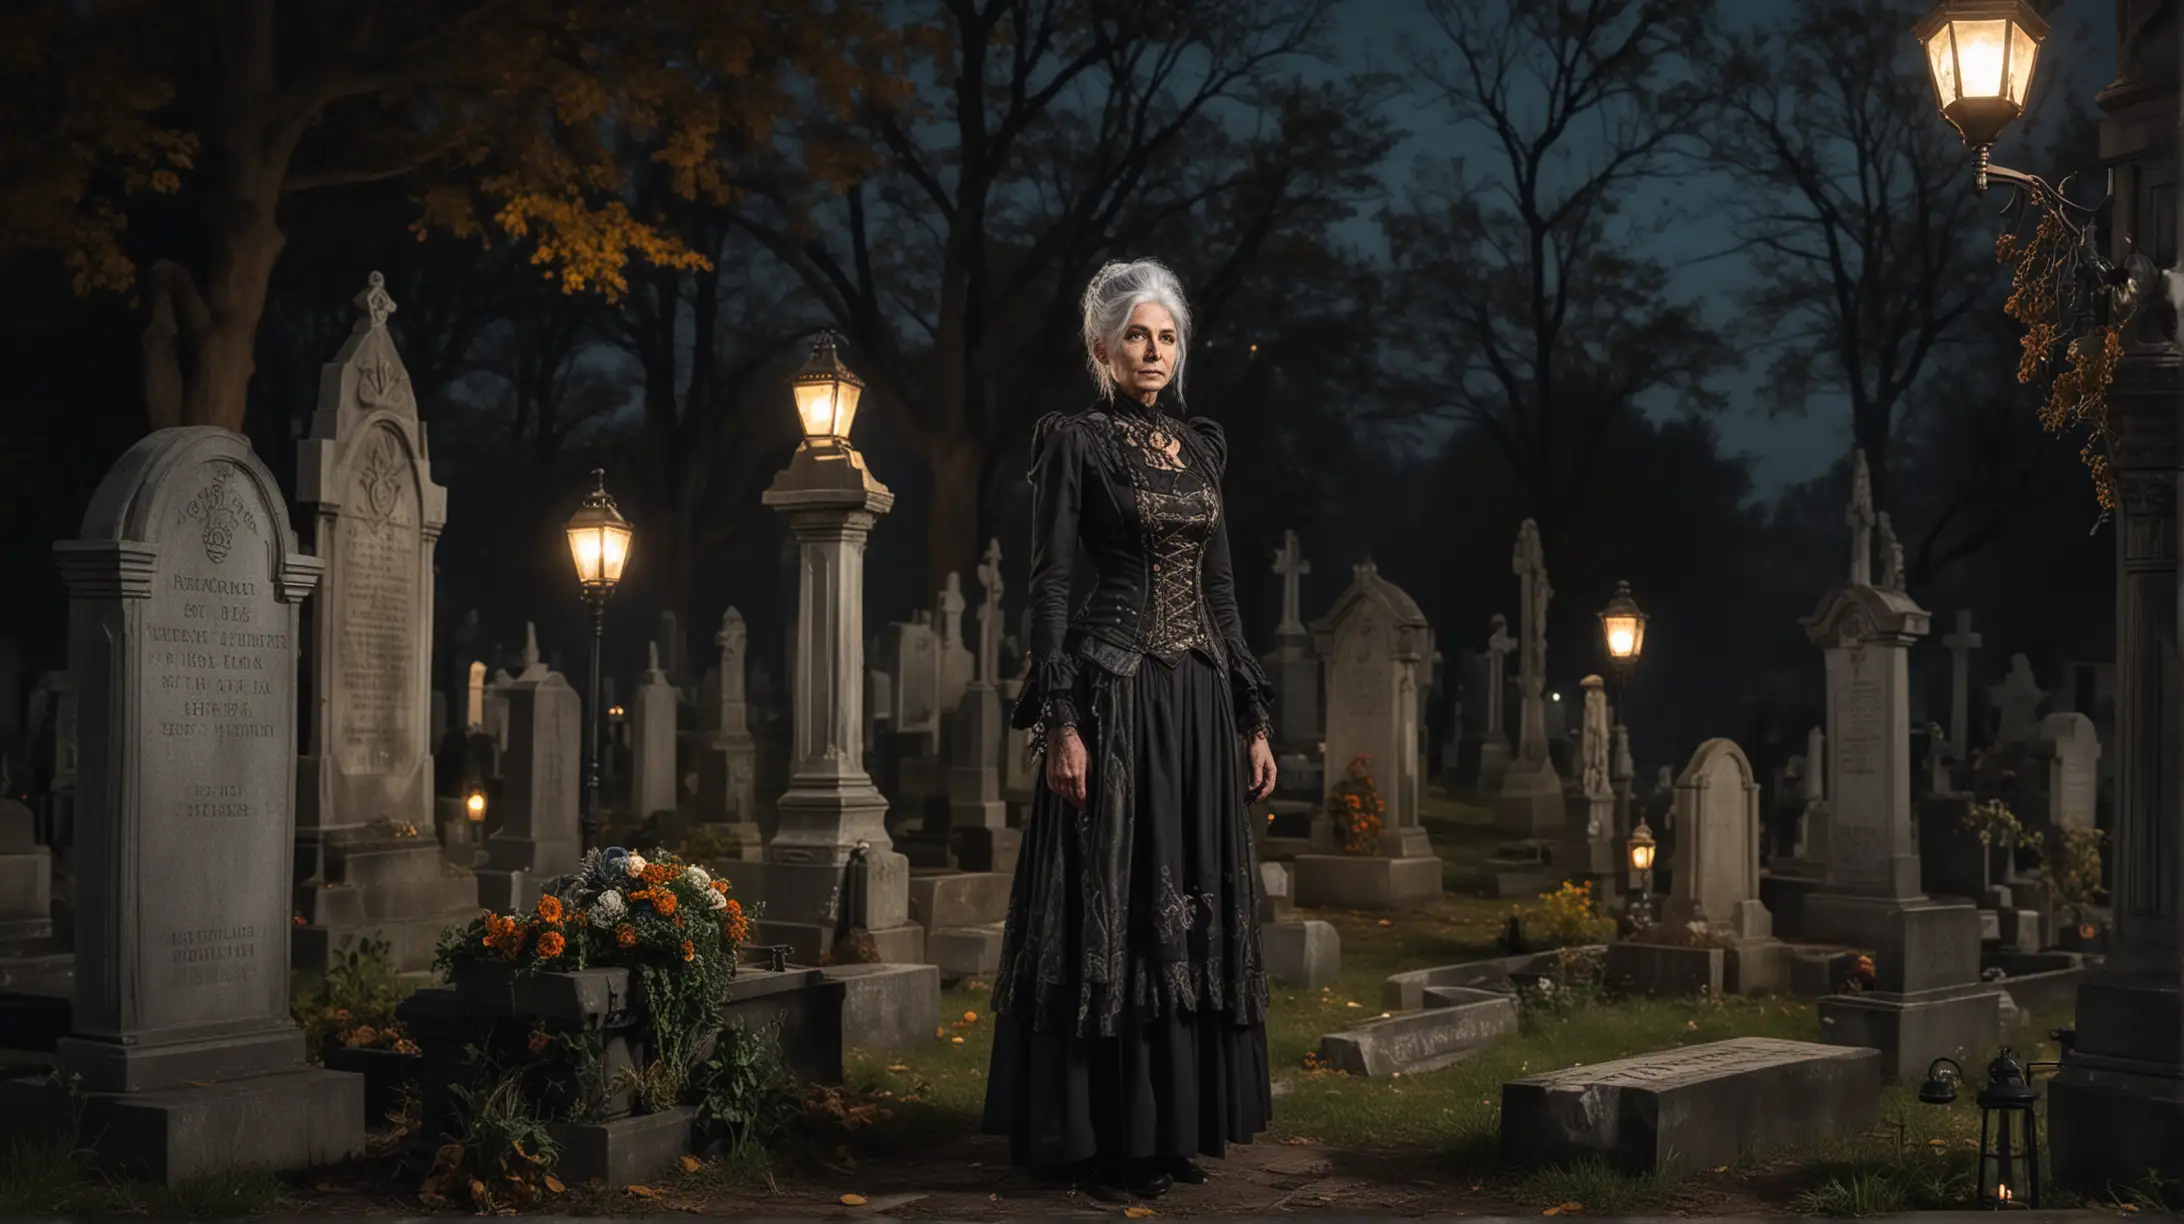 a very old steampunk woman with grey hair, in elegant steampunk dress stands in front of an old grave at a local cemetery, late night, few lanterns are on, good weather